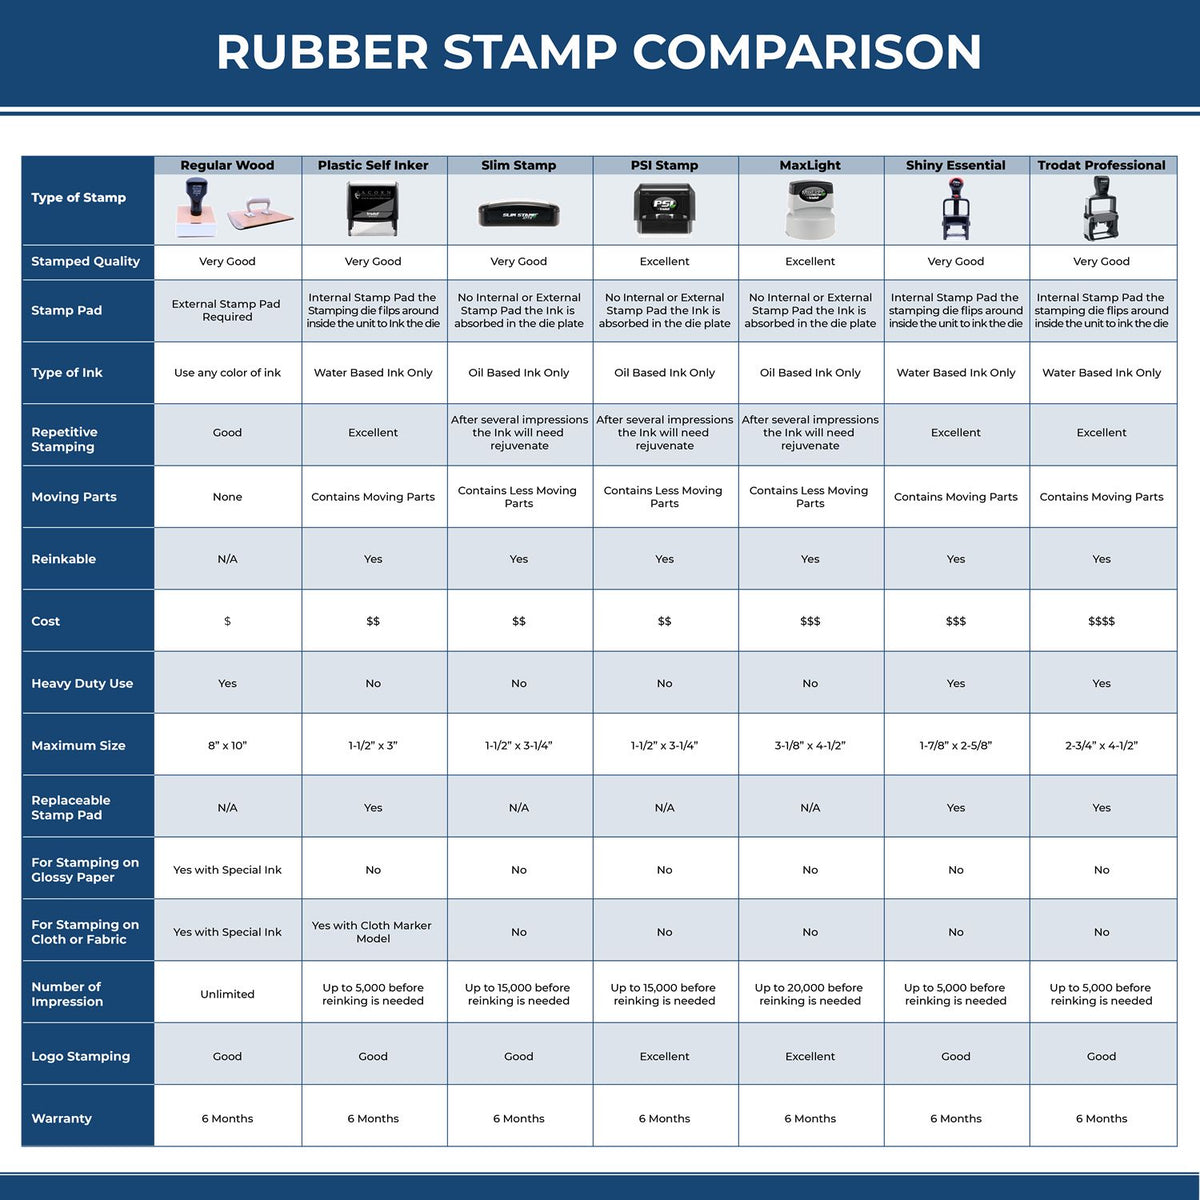 A comparison chart for the different types of mount models available for the Super Slim Guam Notary Public Stamp.